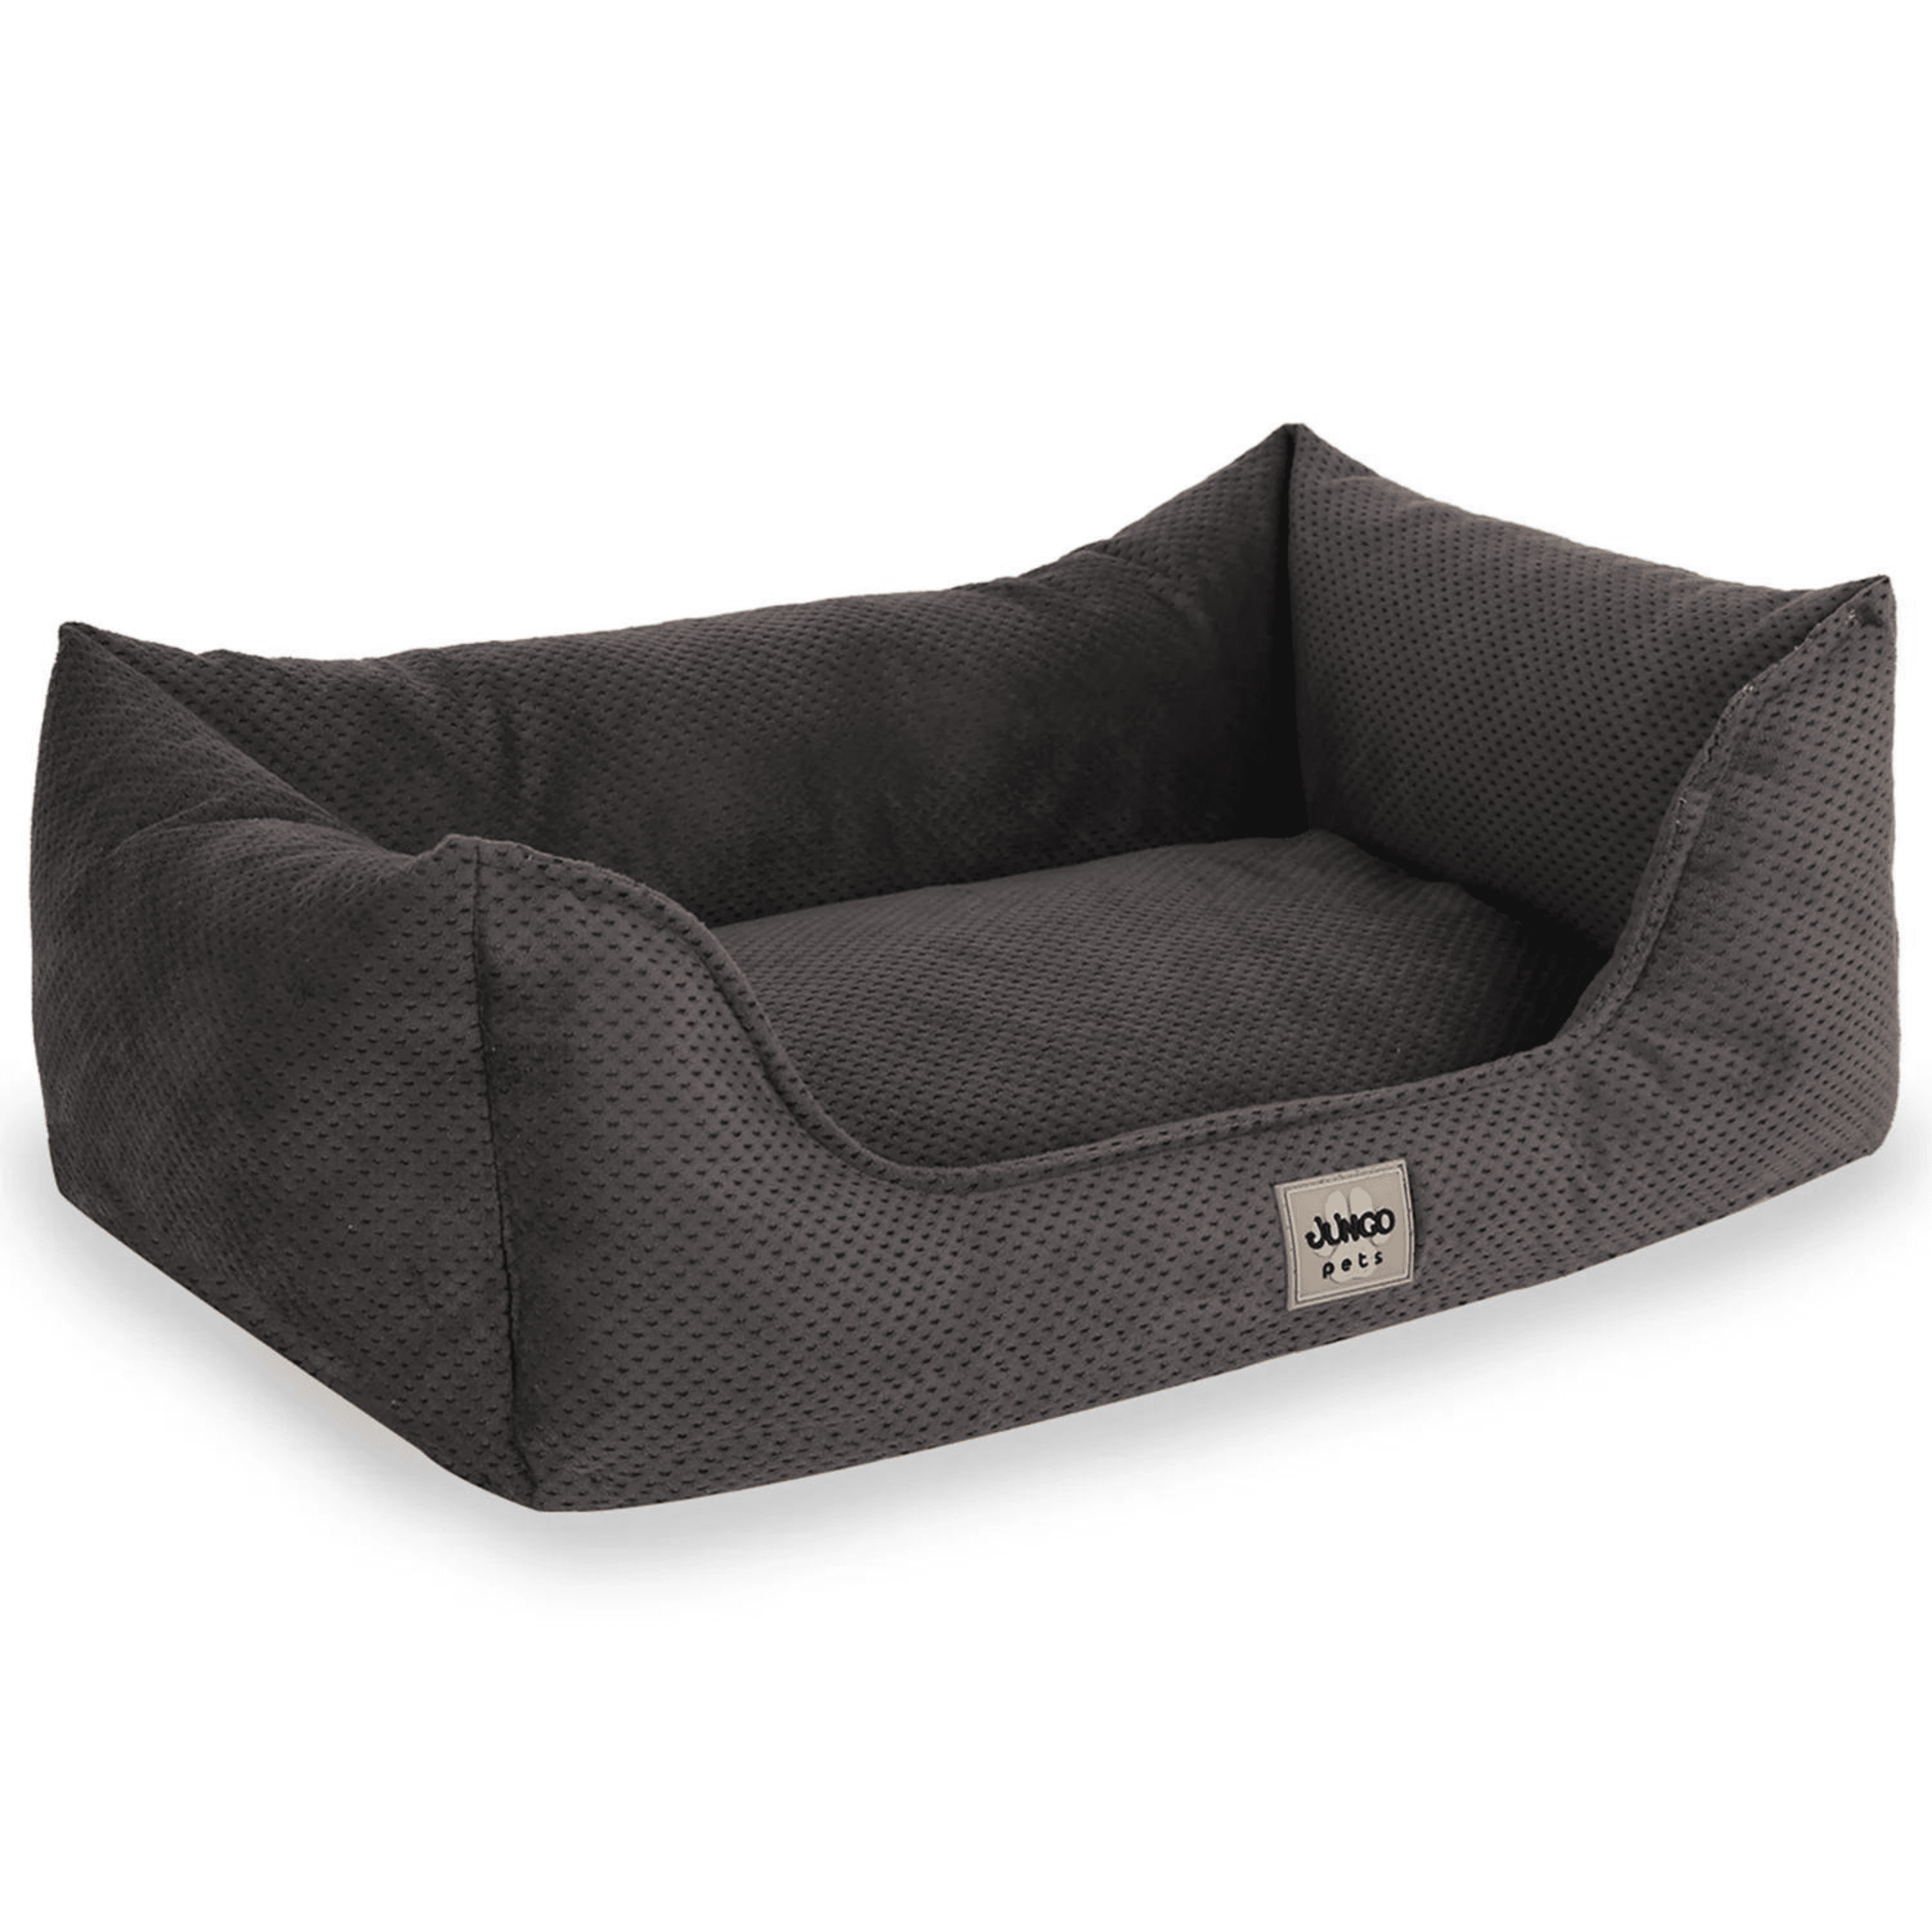 Roxy, Comfortable, High Quality Cat and Dog Bed with Memory Foam Sponge, 100% WaterProof